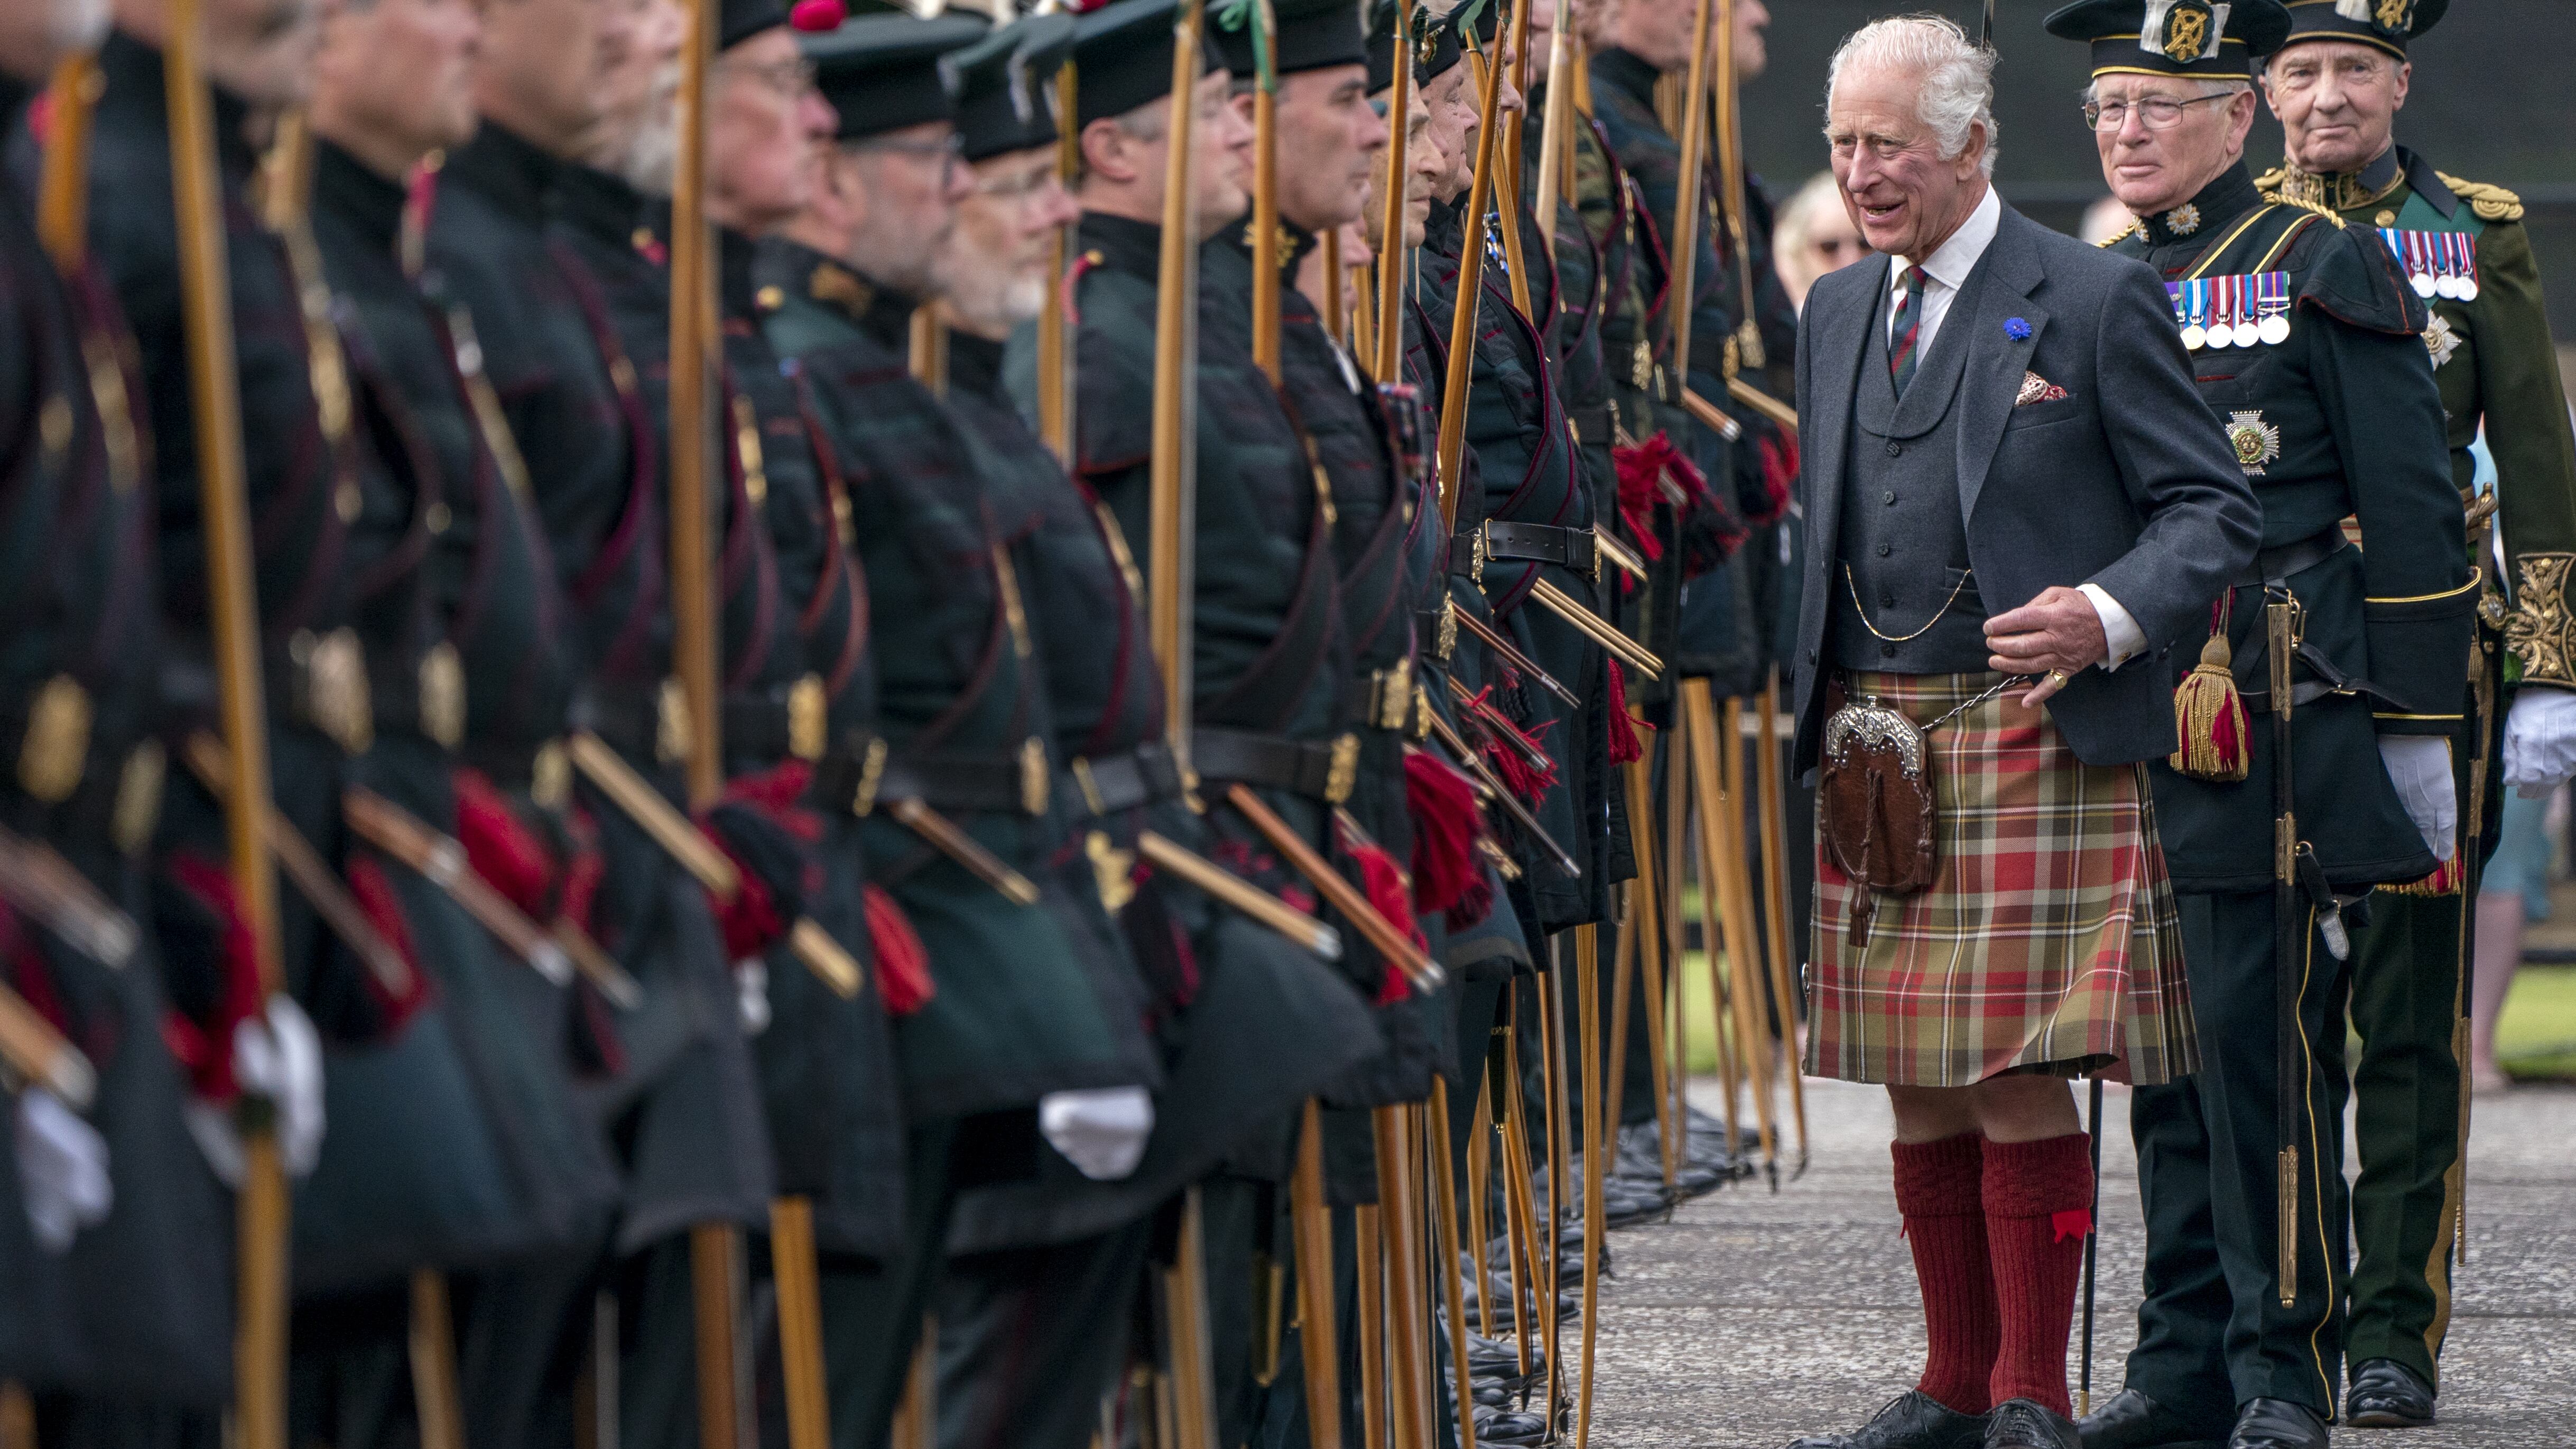 The King during the Ceremony of the Keys on the forecourt of the Palace of Holyroodhouse in Edinburgh in 2023